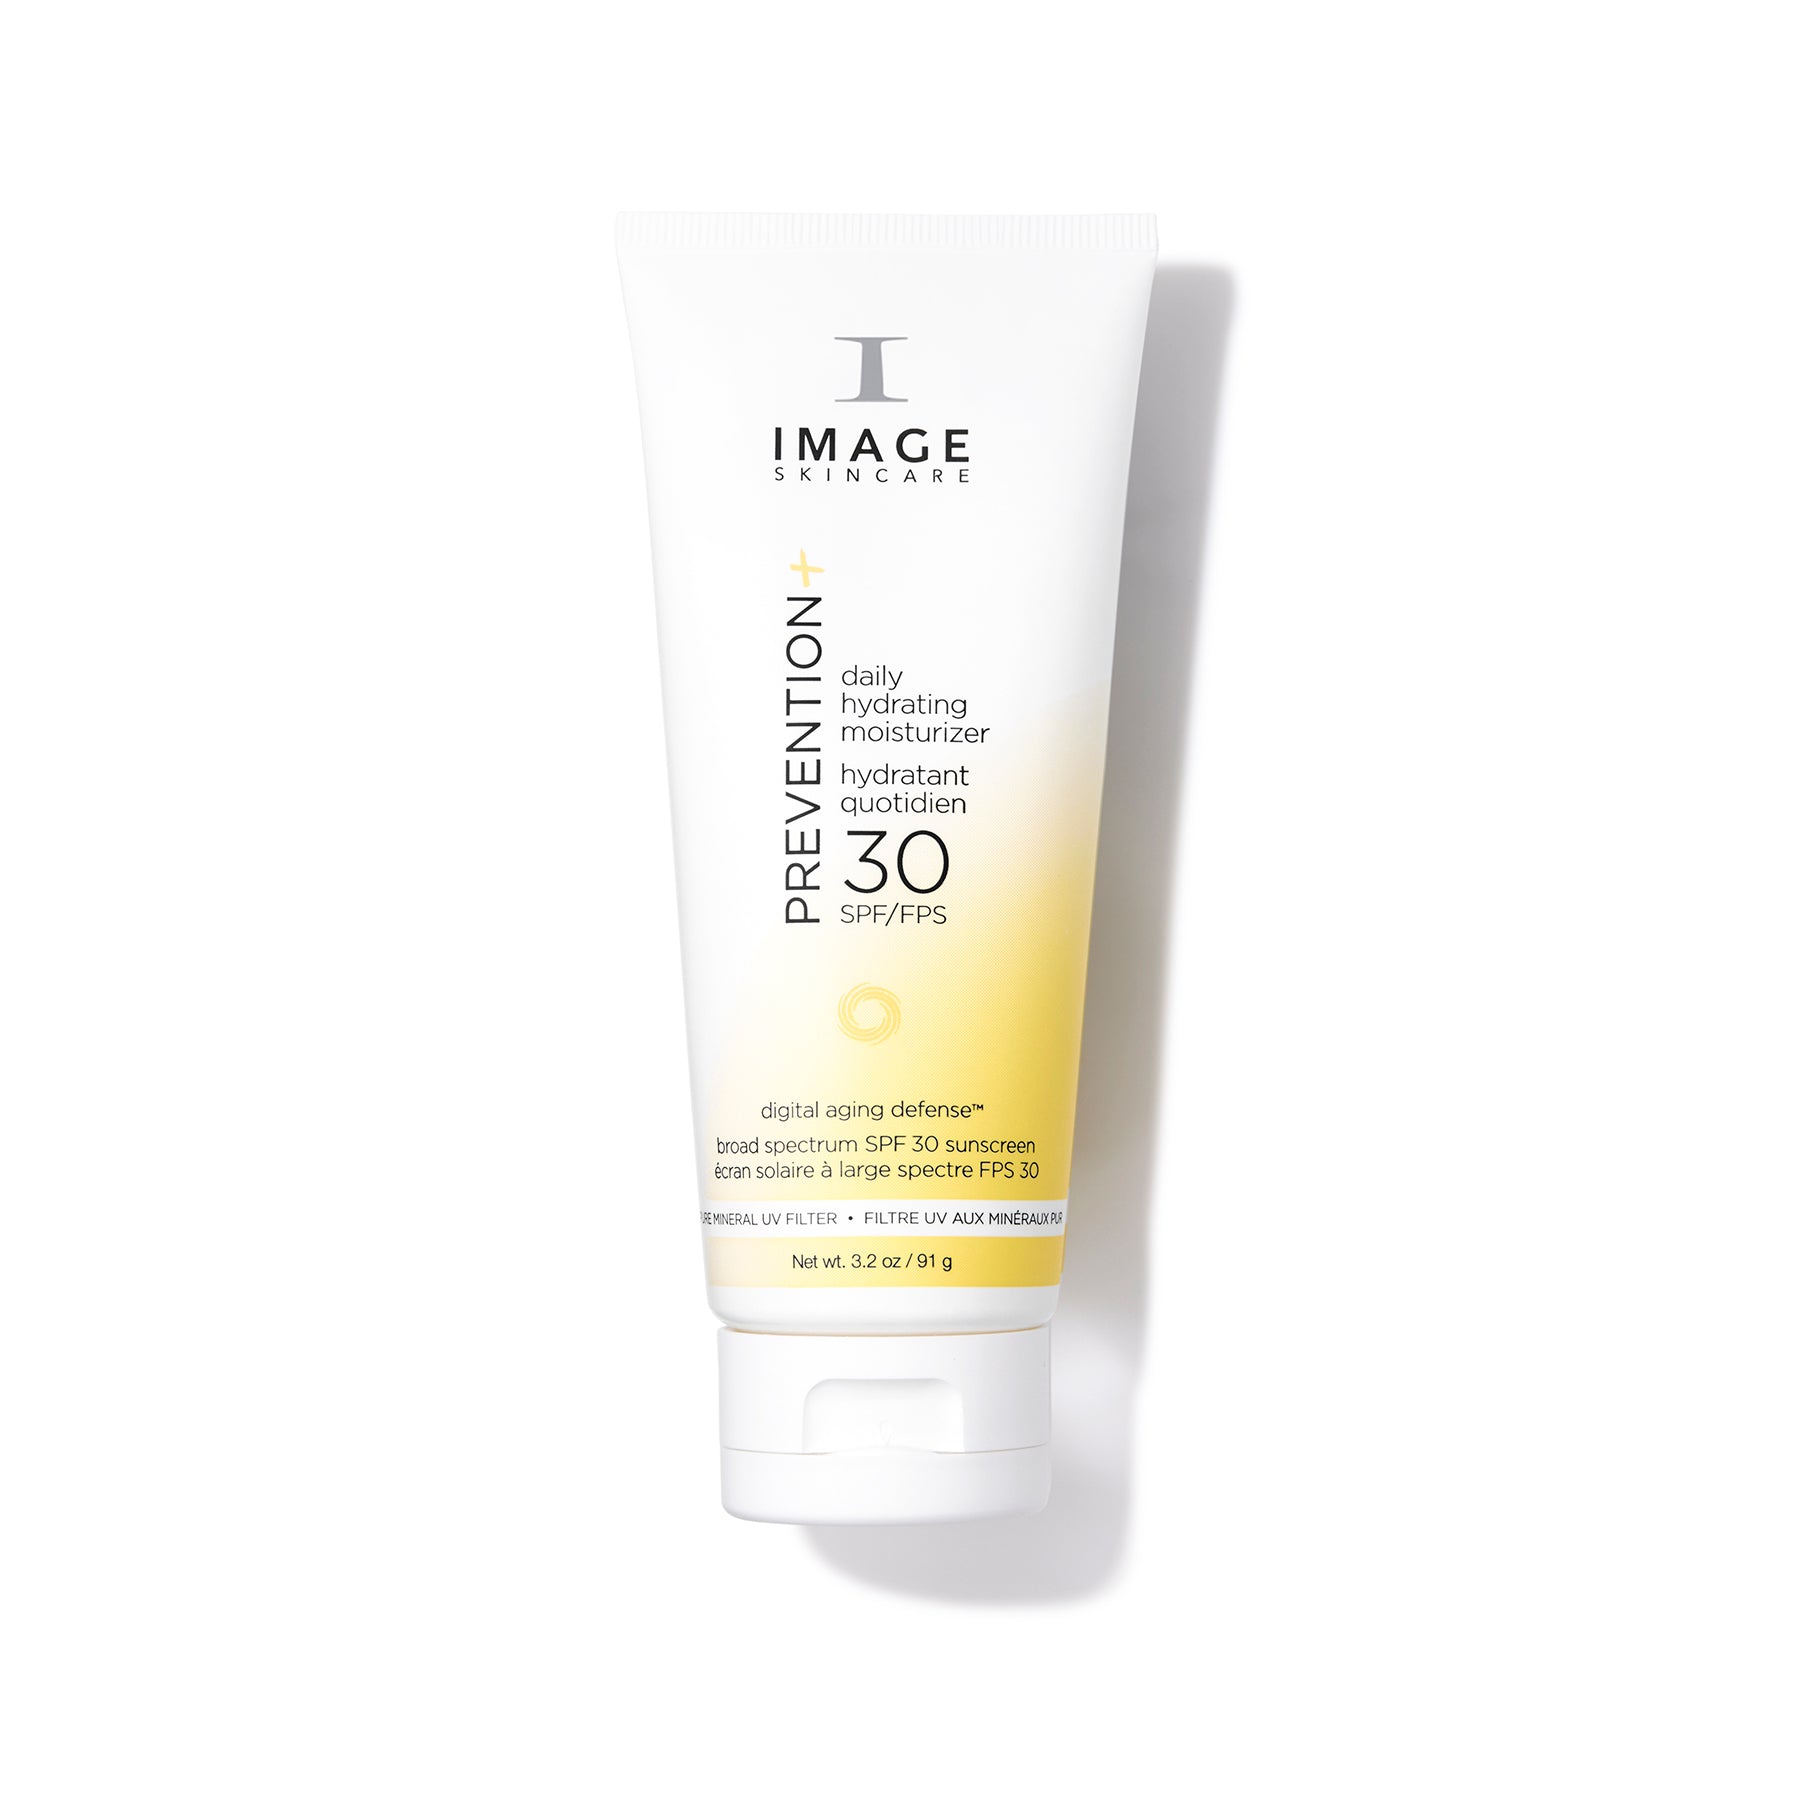 Image Skincare Prevention+ Daily Hydrating Moisturizer SPF30 Shop At Exclusive Beauty